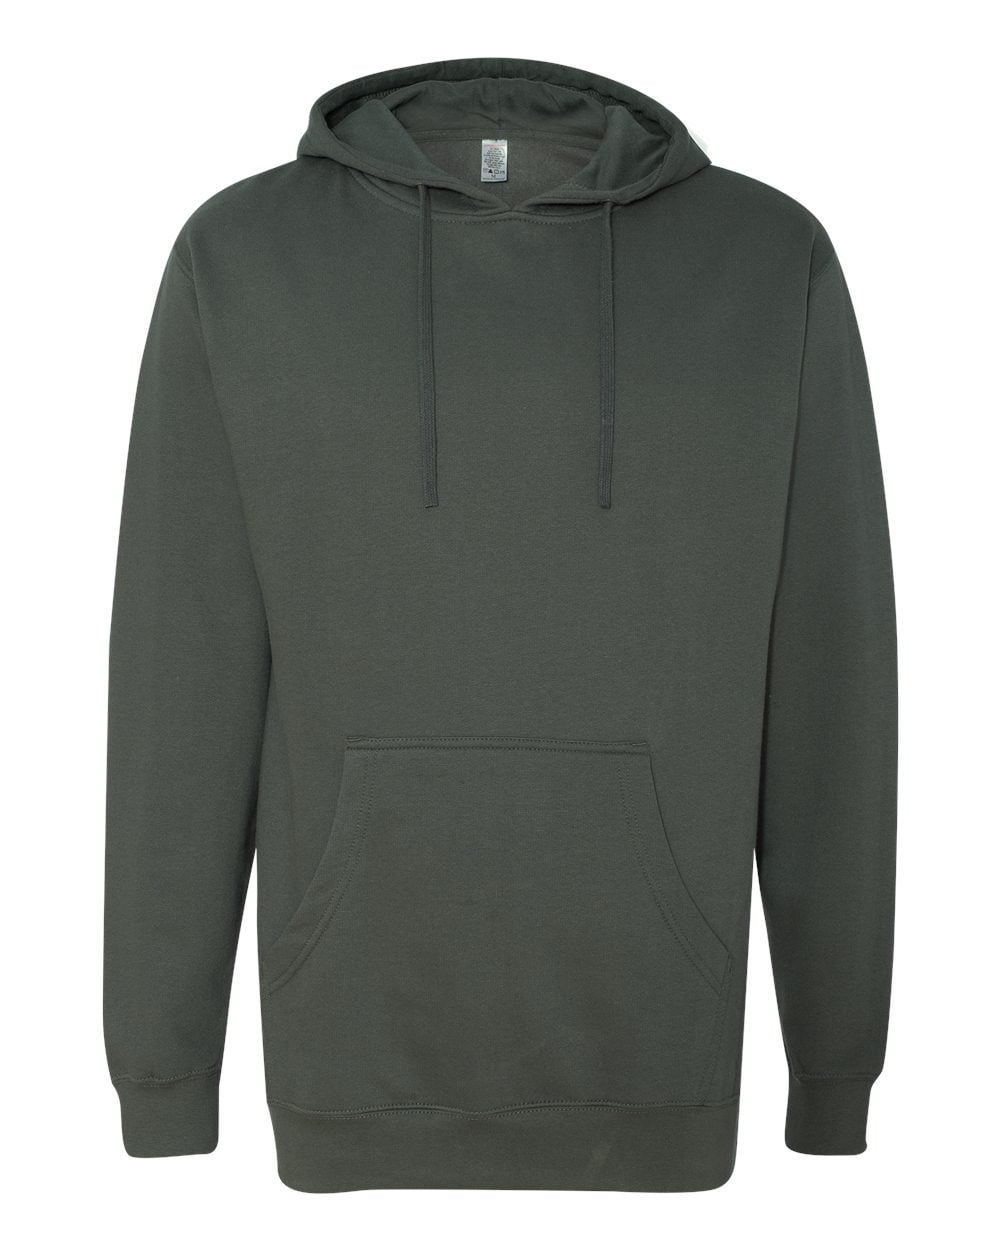 ITC SS4500 Men's Midweight Hooded Pullover Sweatshirt - Charcoal ...